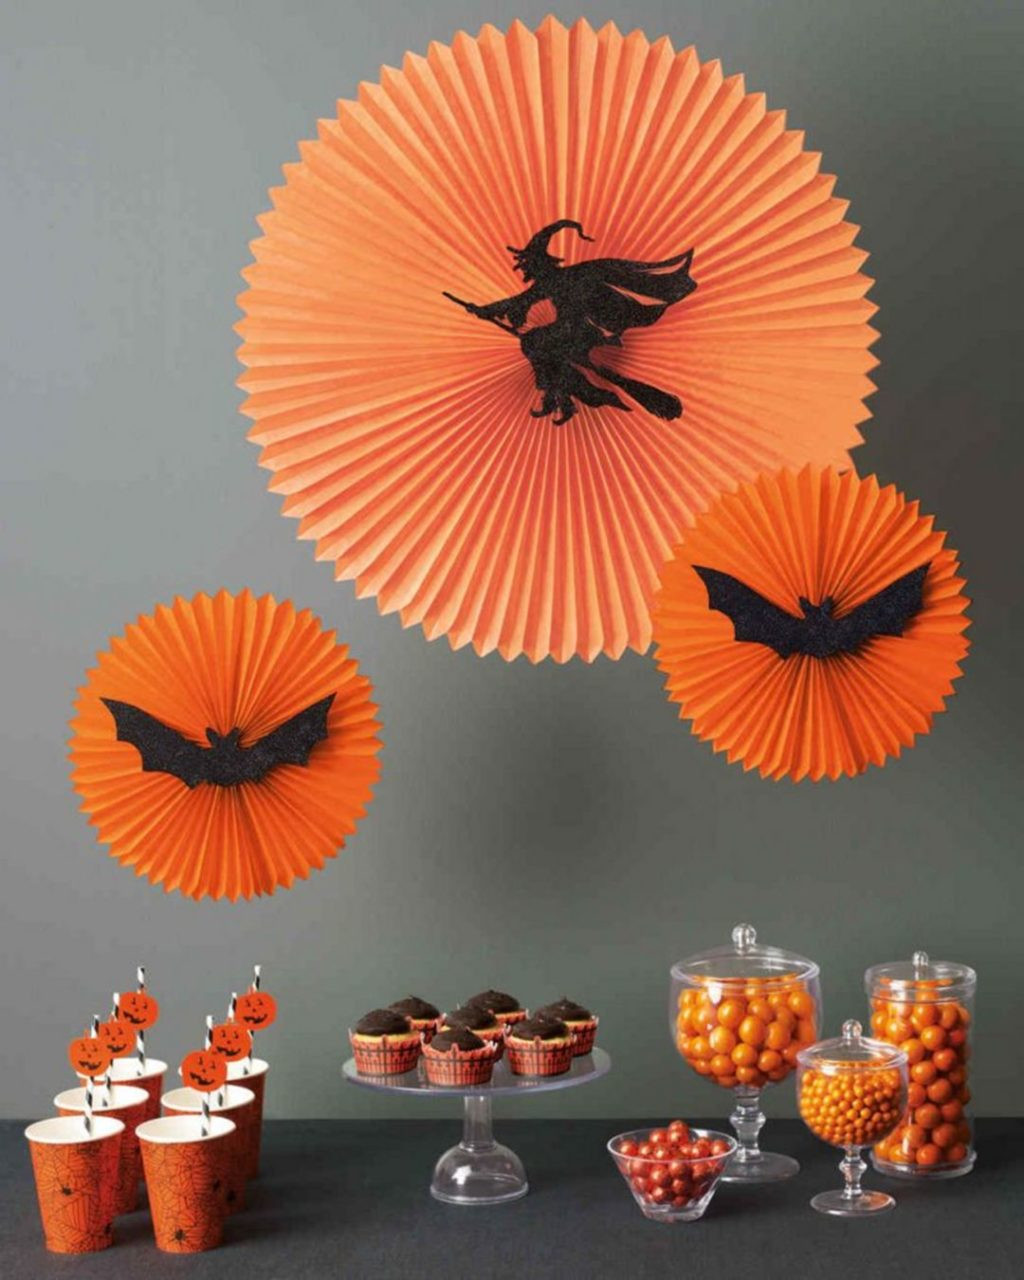 Diy Scary Indoor Halloween Decorations
 15 Interesting DIY Halloween Decoration Ideas for You to